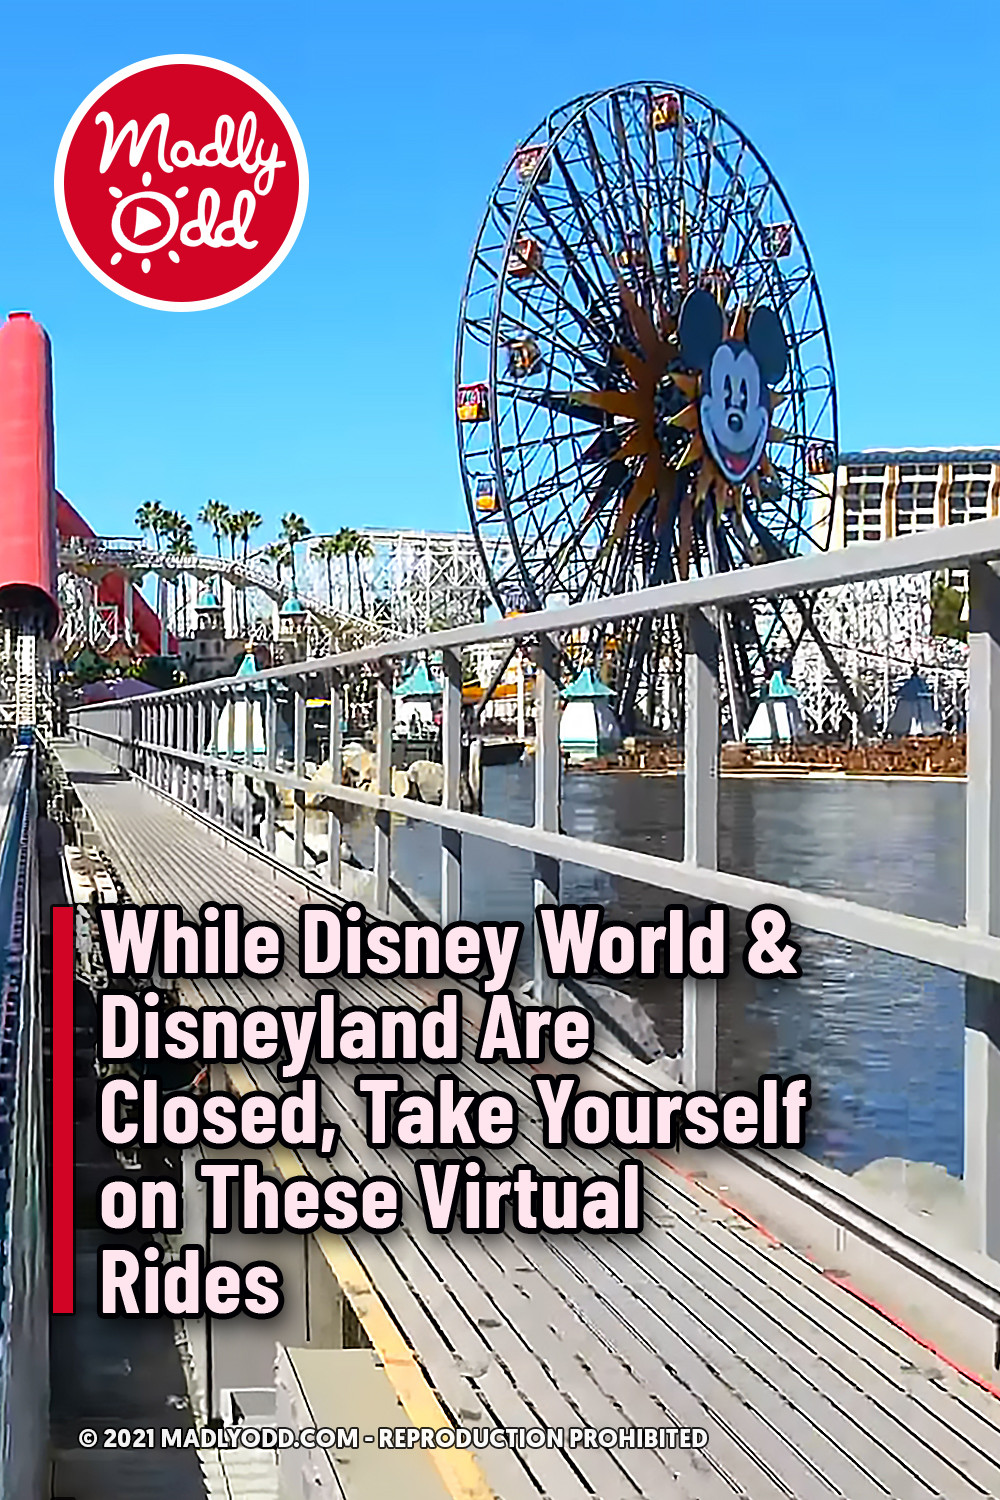 While Disney World & Disneyland Are Closed, Take Yourself on These Virtual Rides